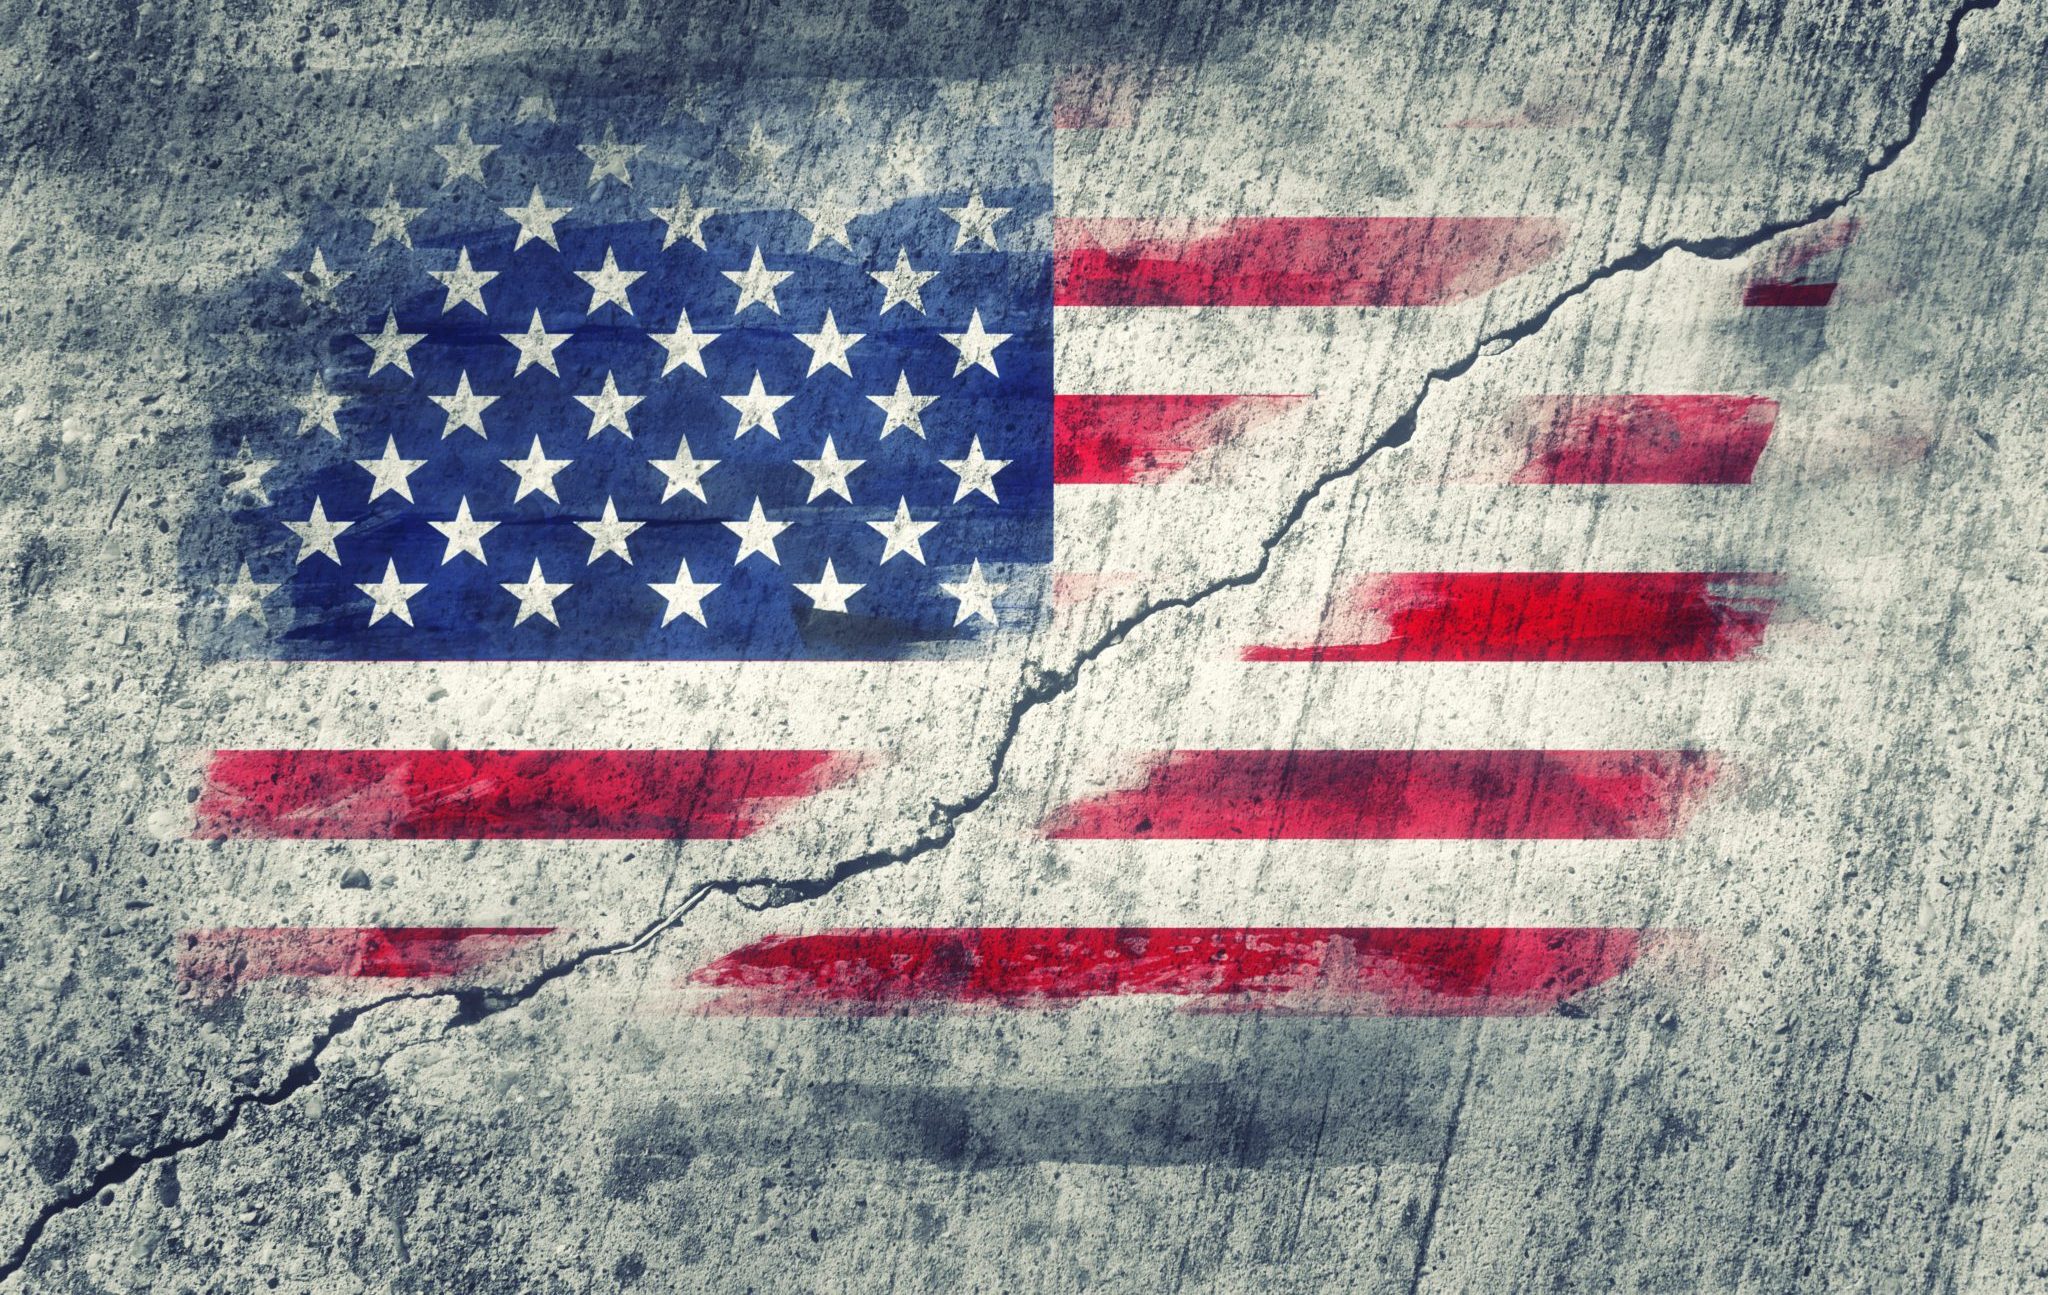 American,Flag,Painted,On,A,Wall,Cracked,In,The,Middle.